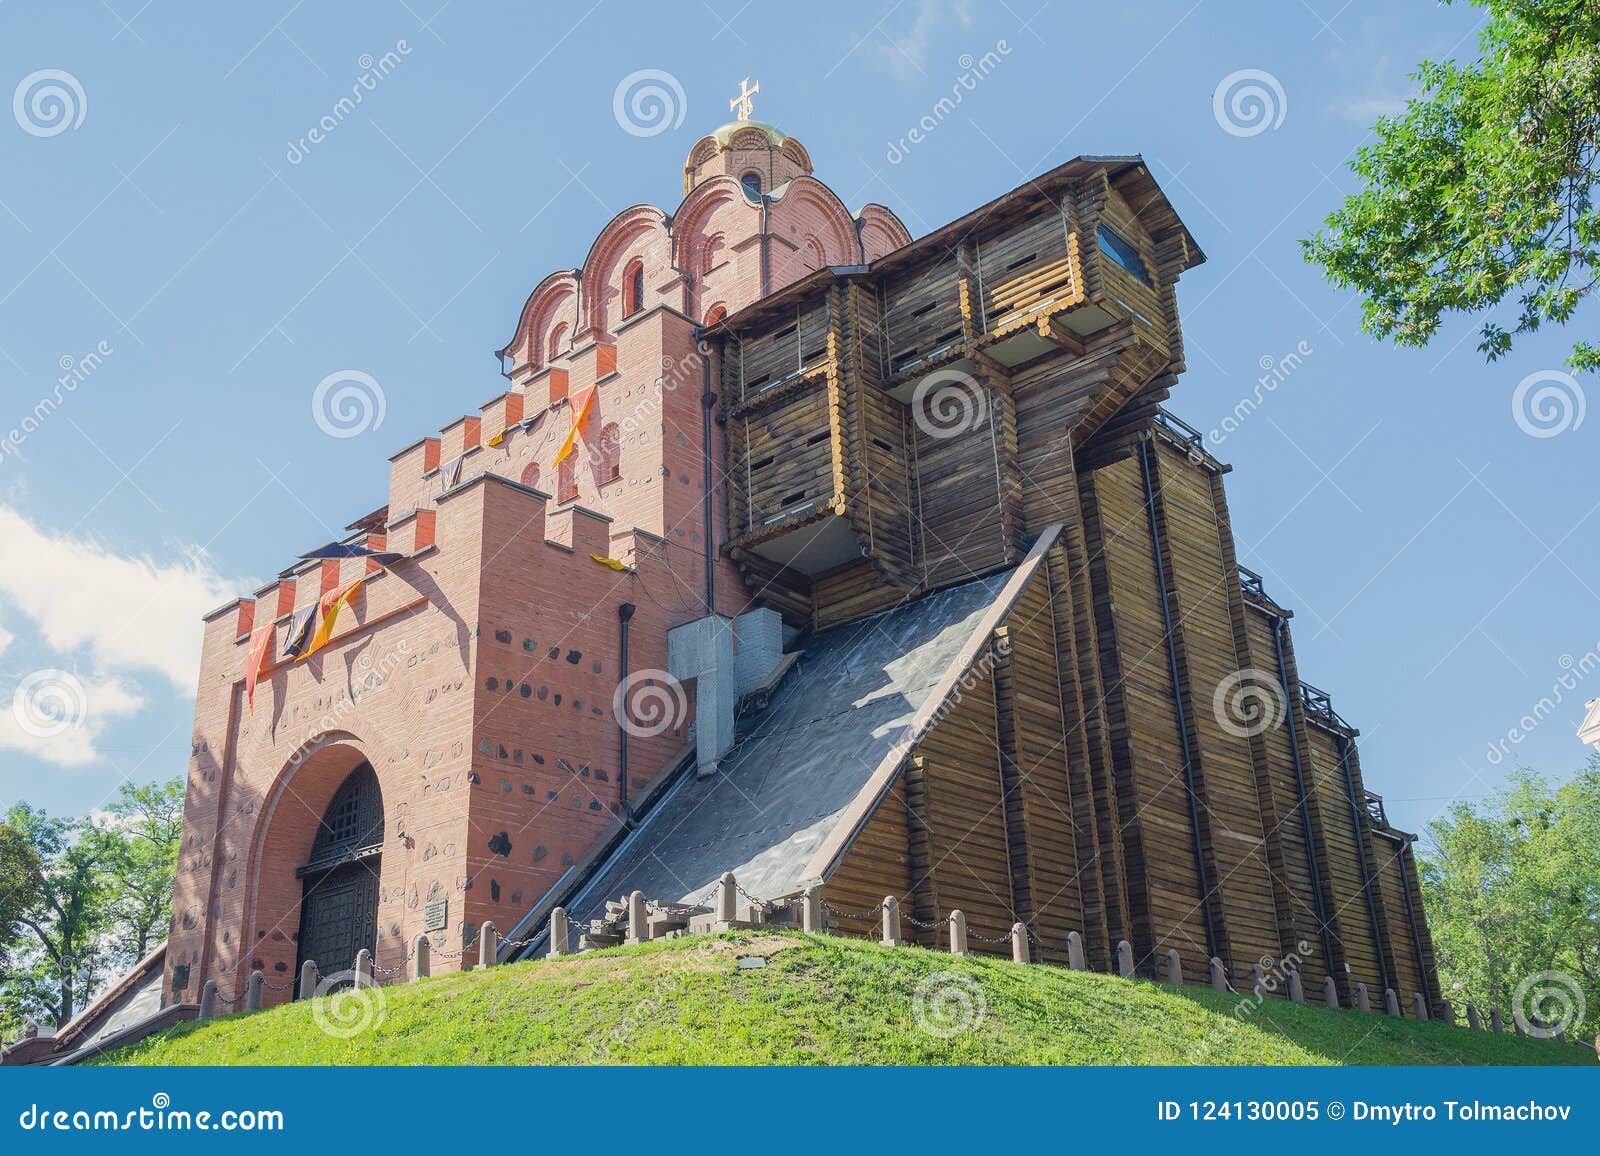 golden gate - ancient fortification building monument from times of kievan rus. kiev